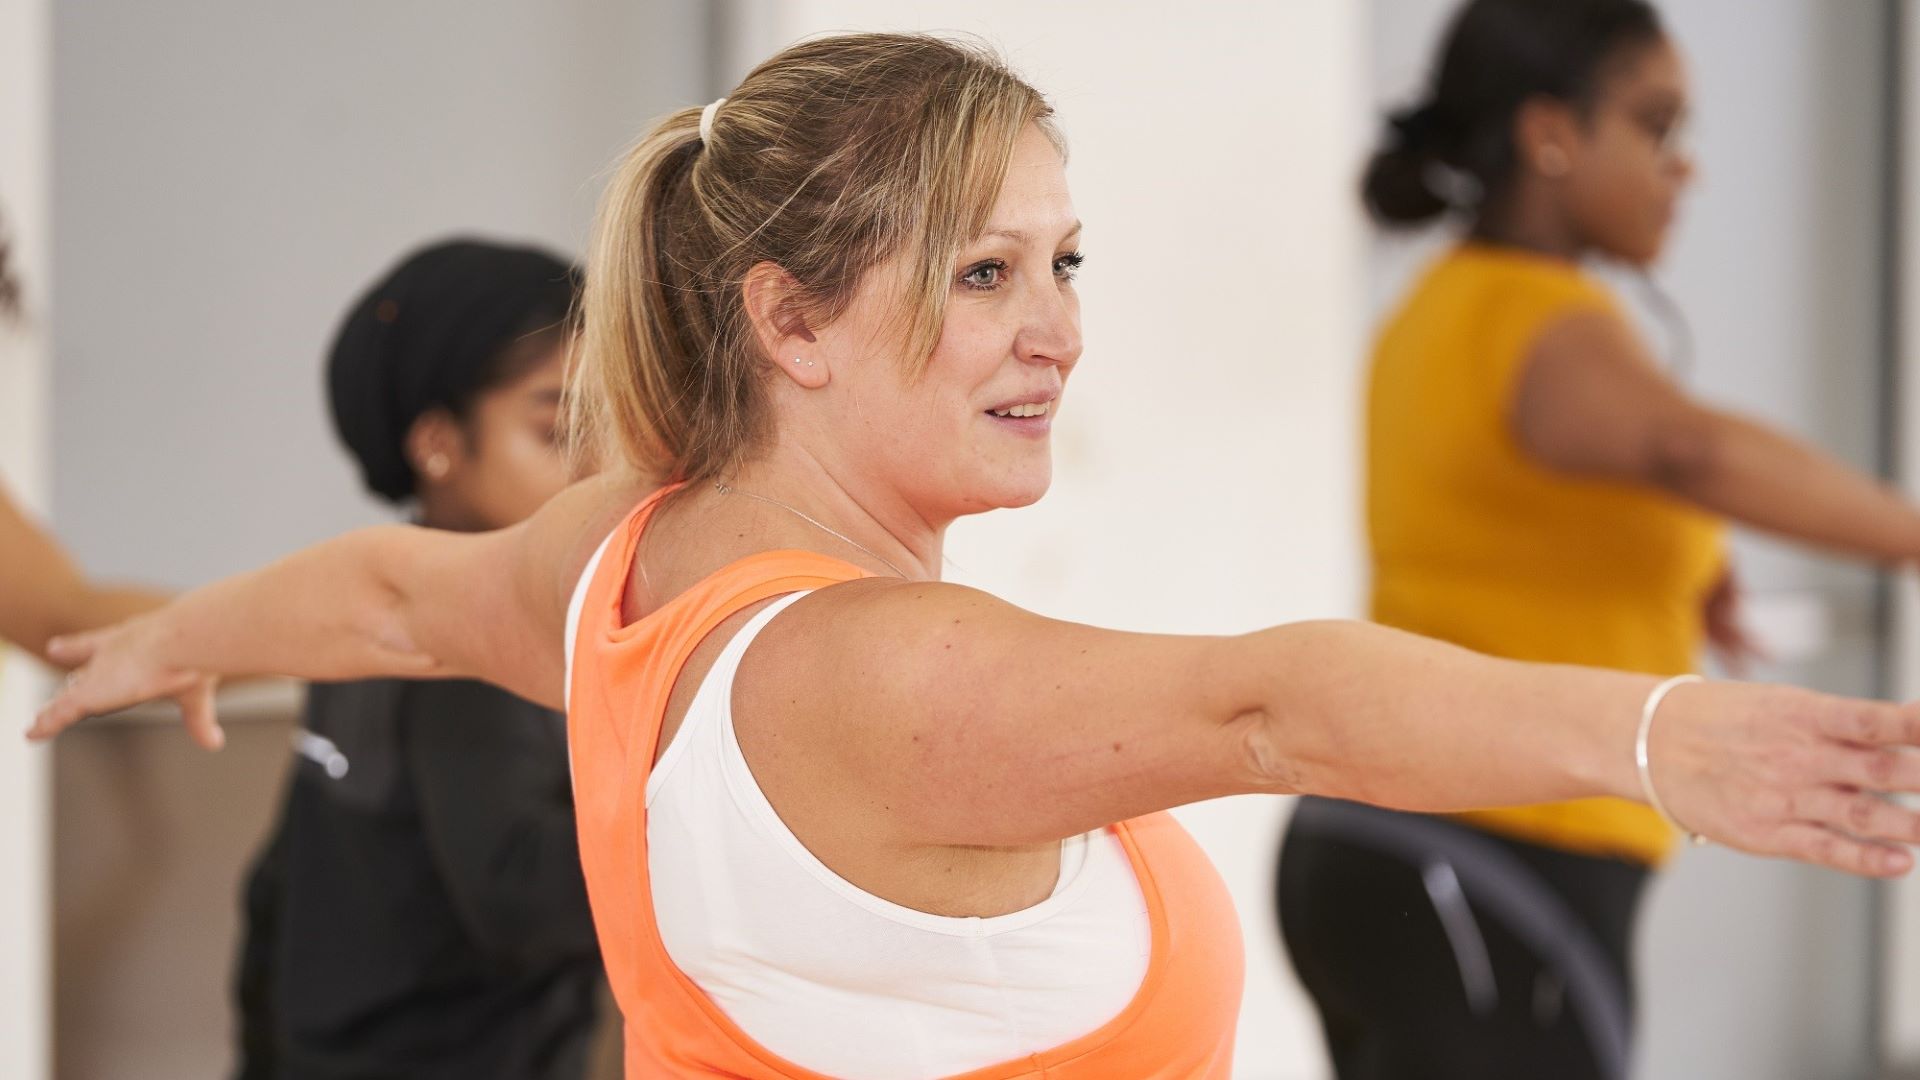 A woman wearing an orange sports top stretches her arms out in a physical activity class.